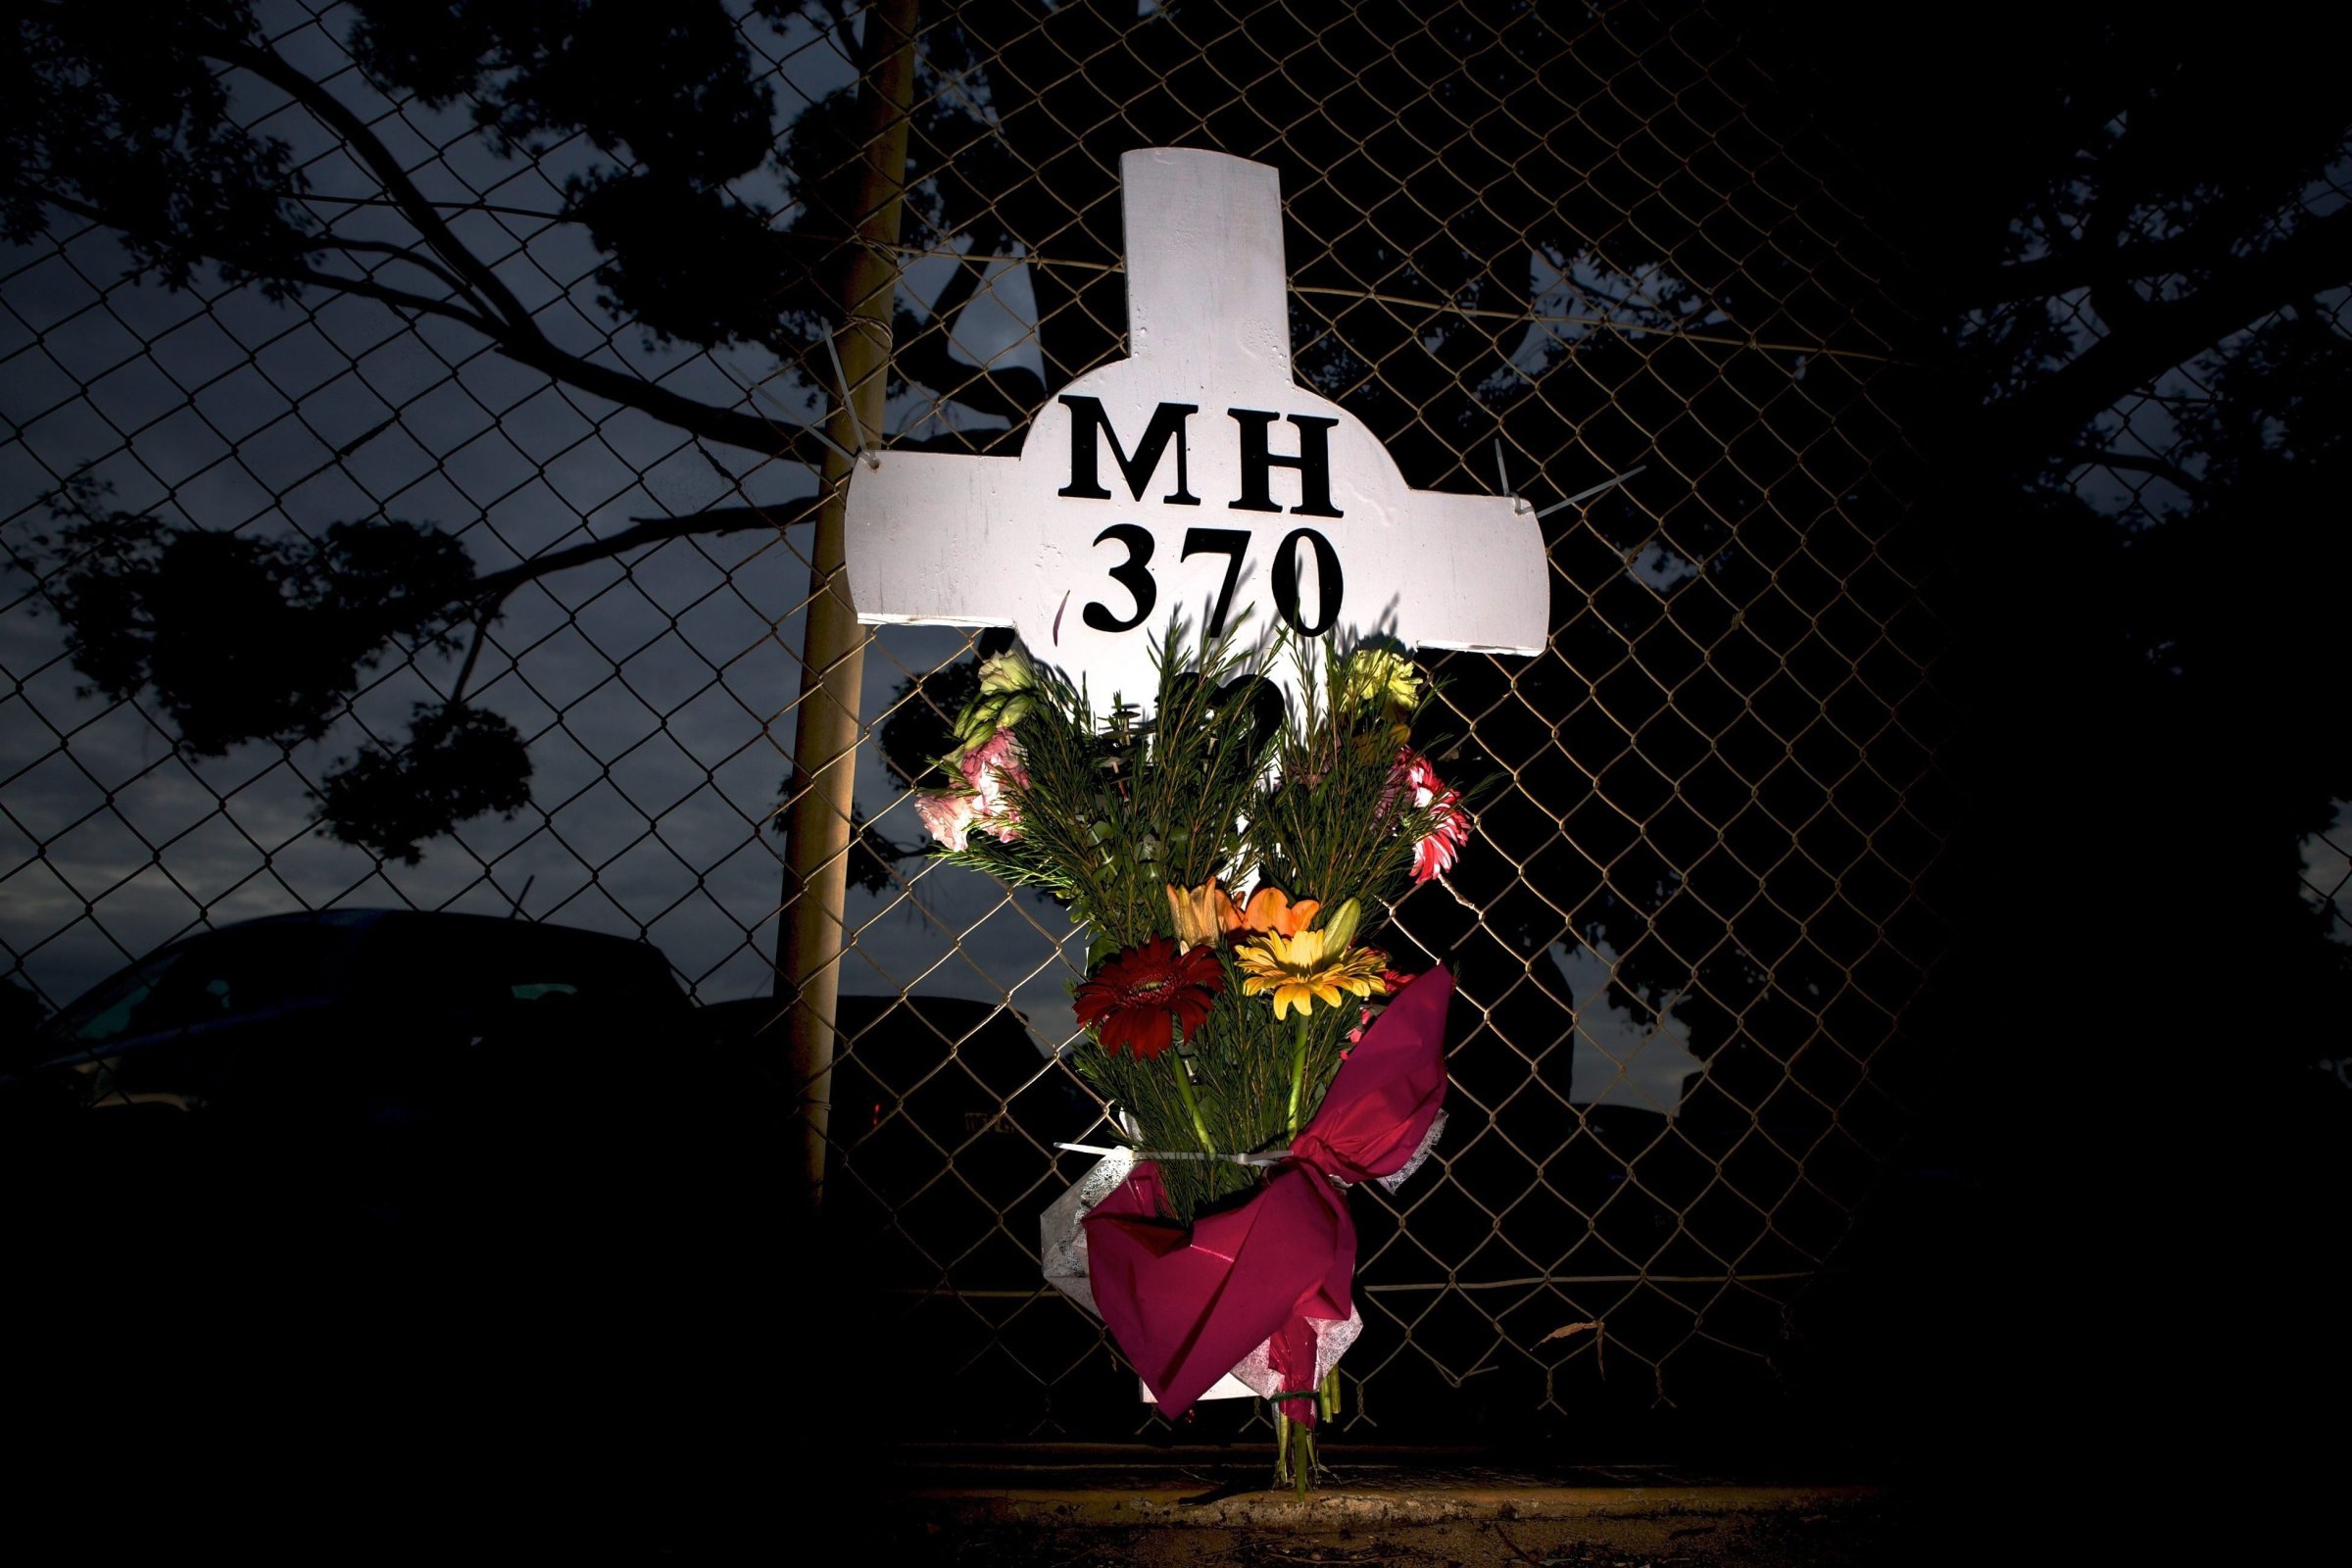 Wreath in memory of the victims of missing Malaysia Airlines flight MH370